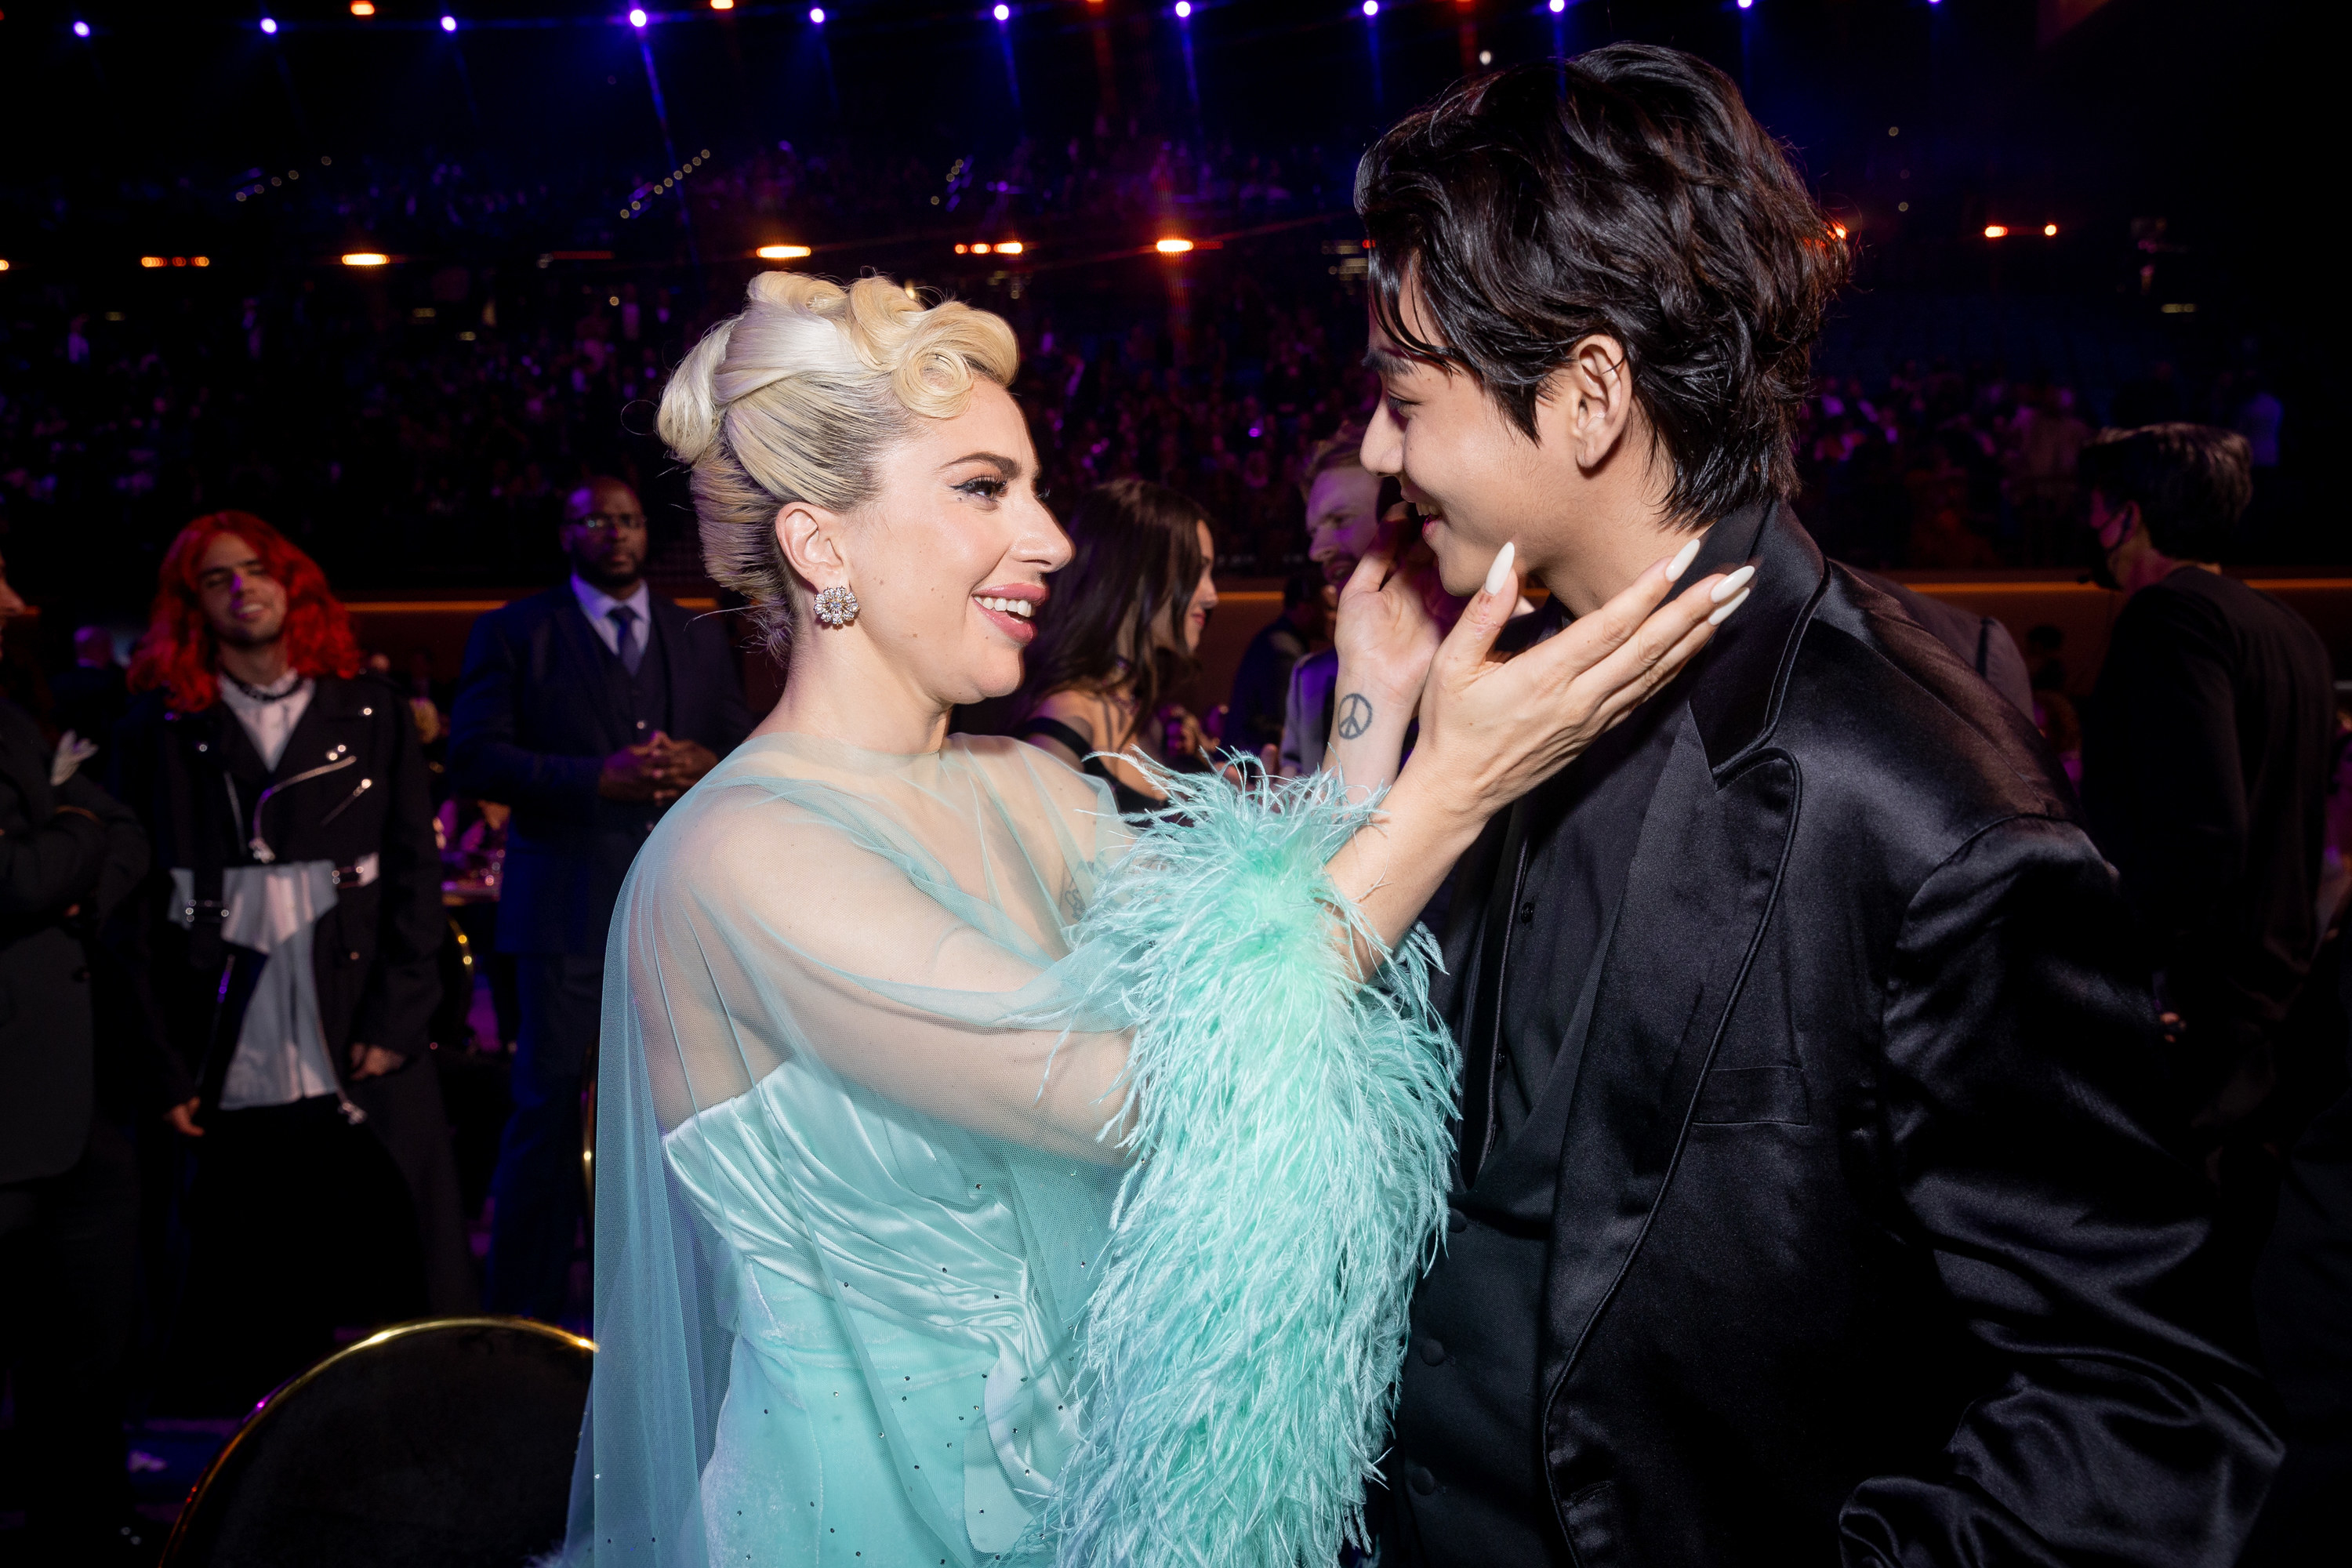 Lady Gaga talking with a member from BTS at the 2022 Grammys.